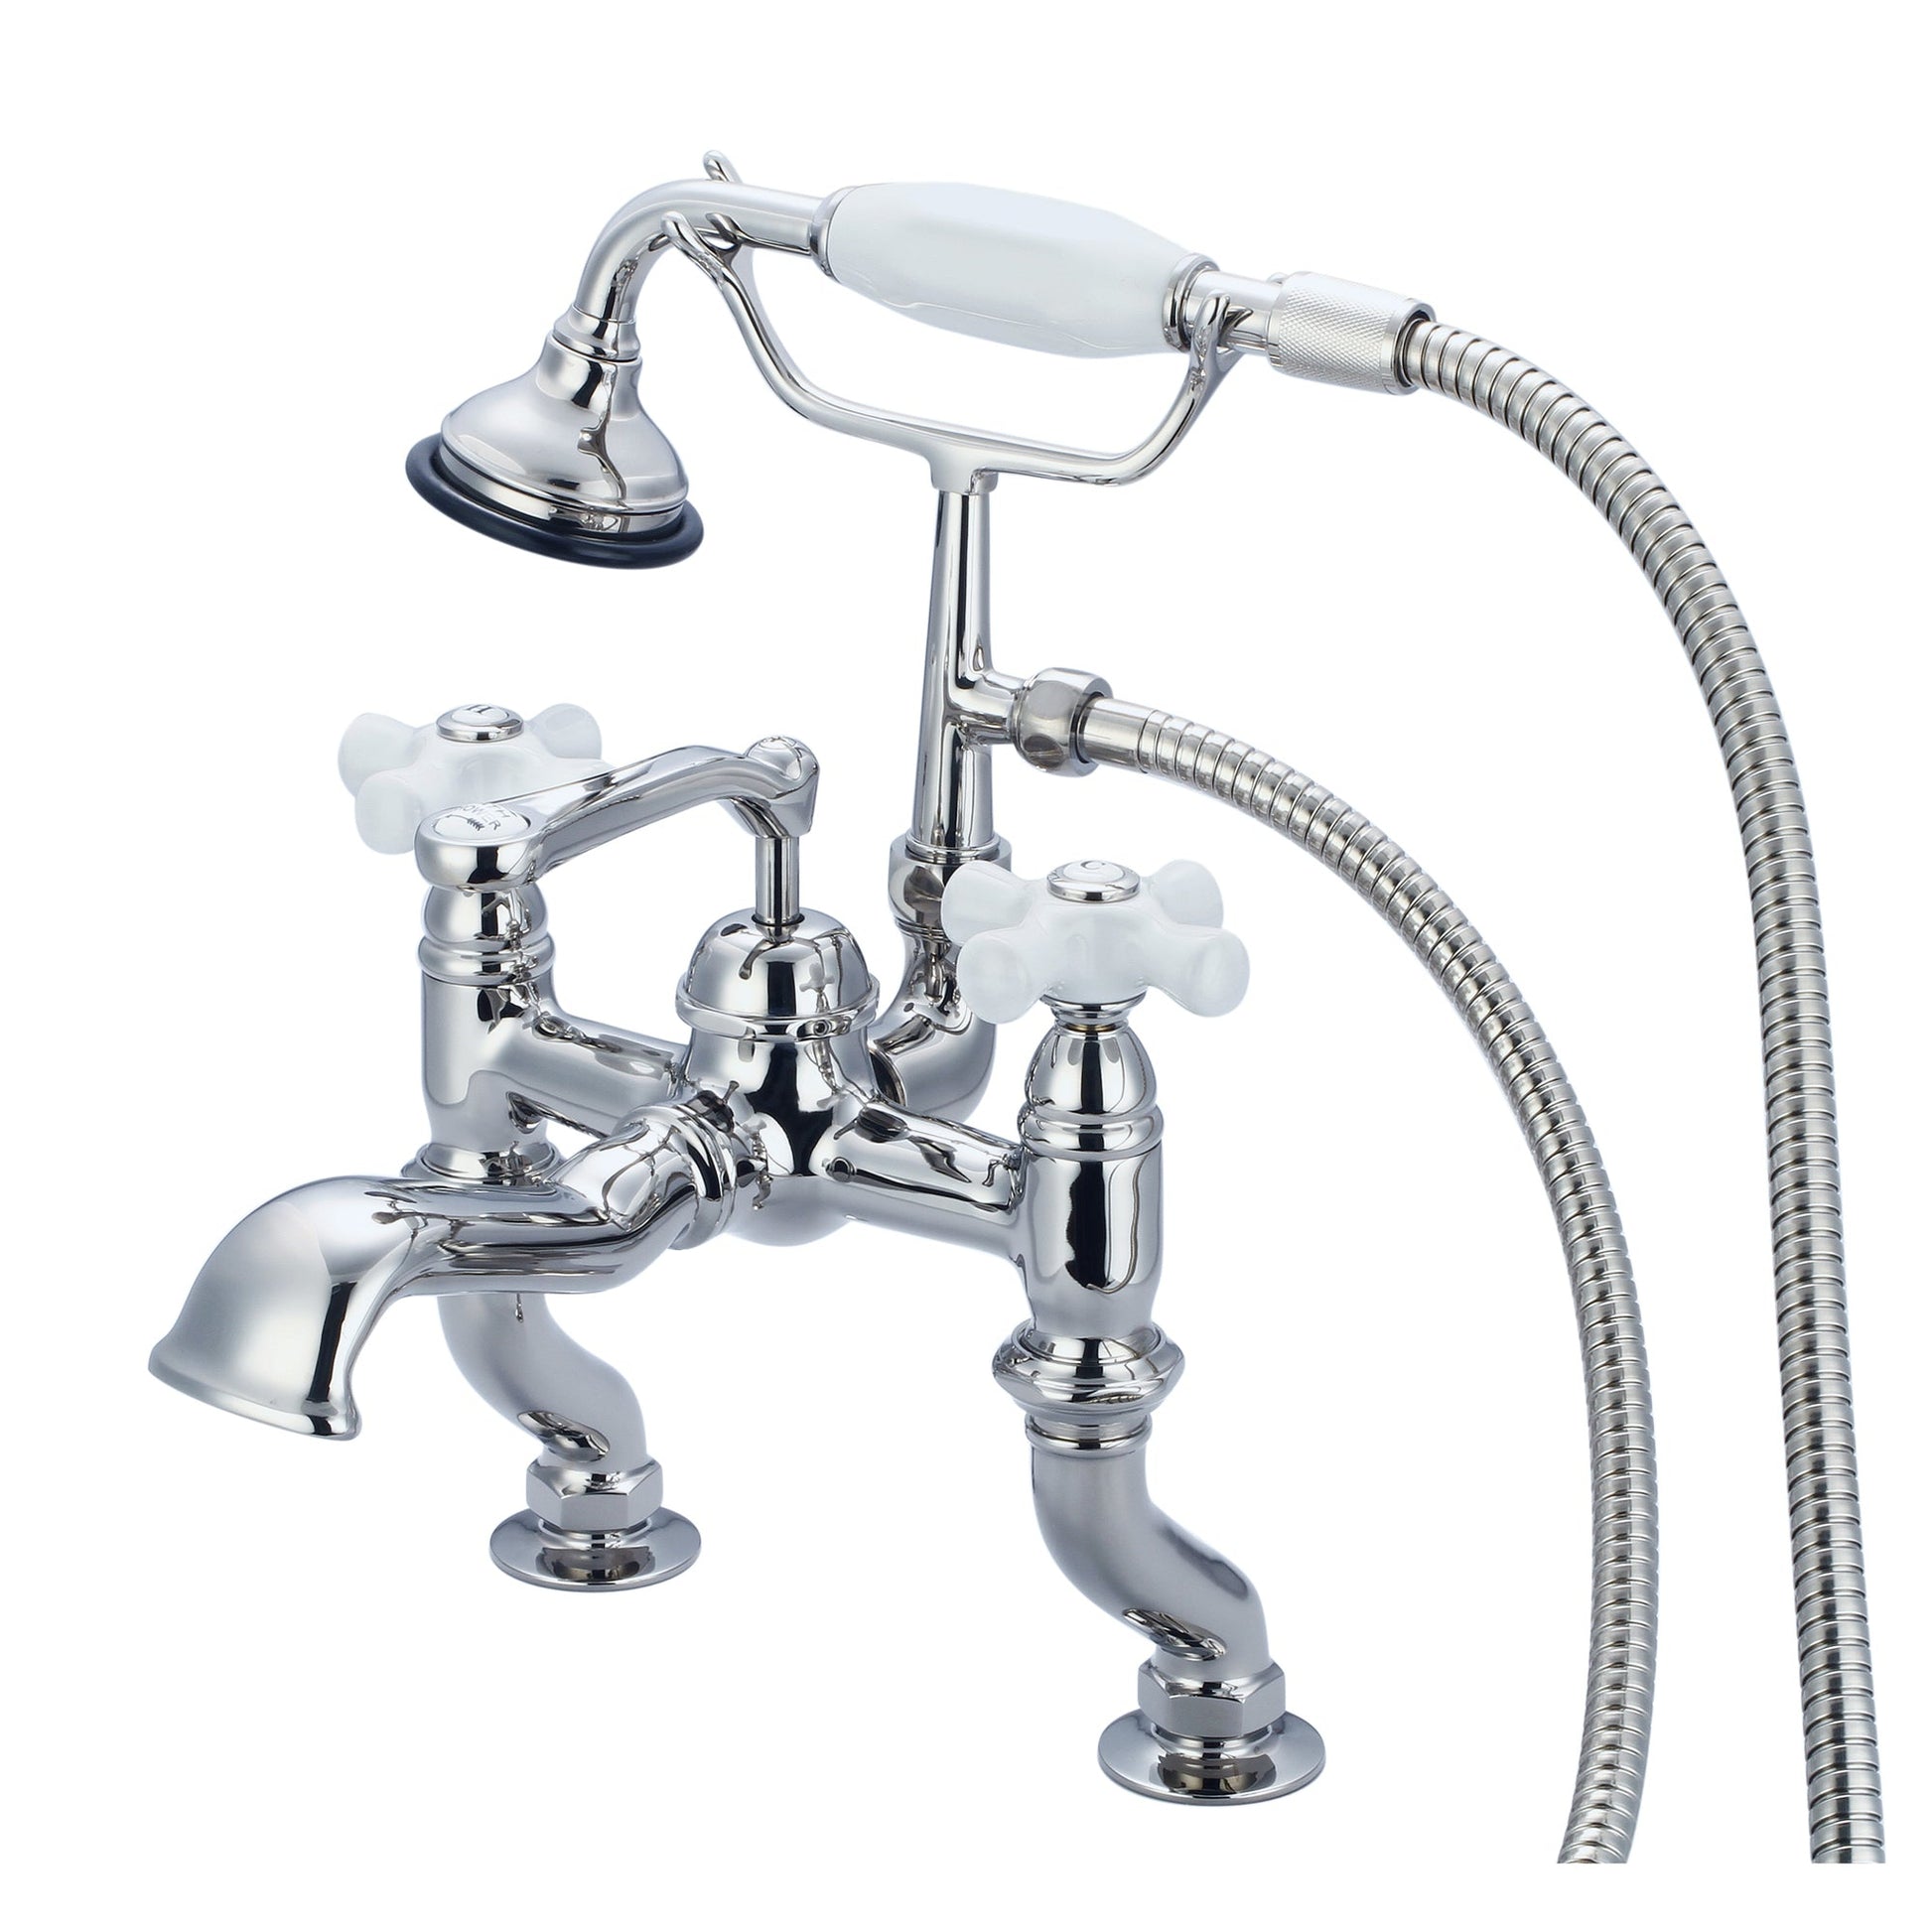 Water Creation Vintage Classic Adjustable Center Deck Mount Tub F6-0004 3.25" Silver Solid Brass Faucet With Handheld Shower And Porcelain Cross Handles, Hot And Cold Labels Included